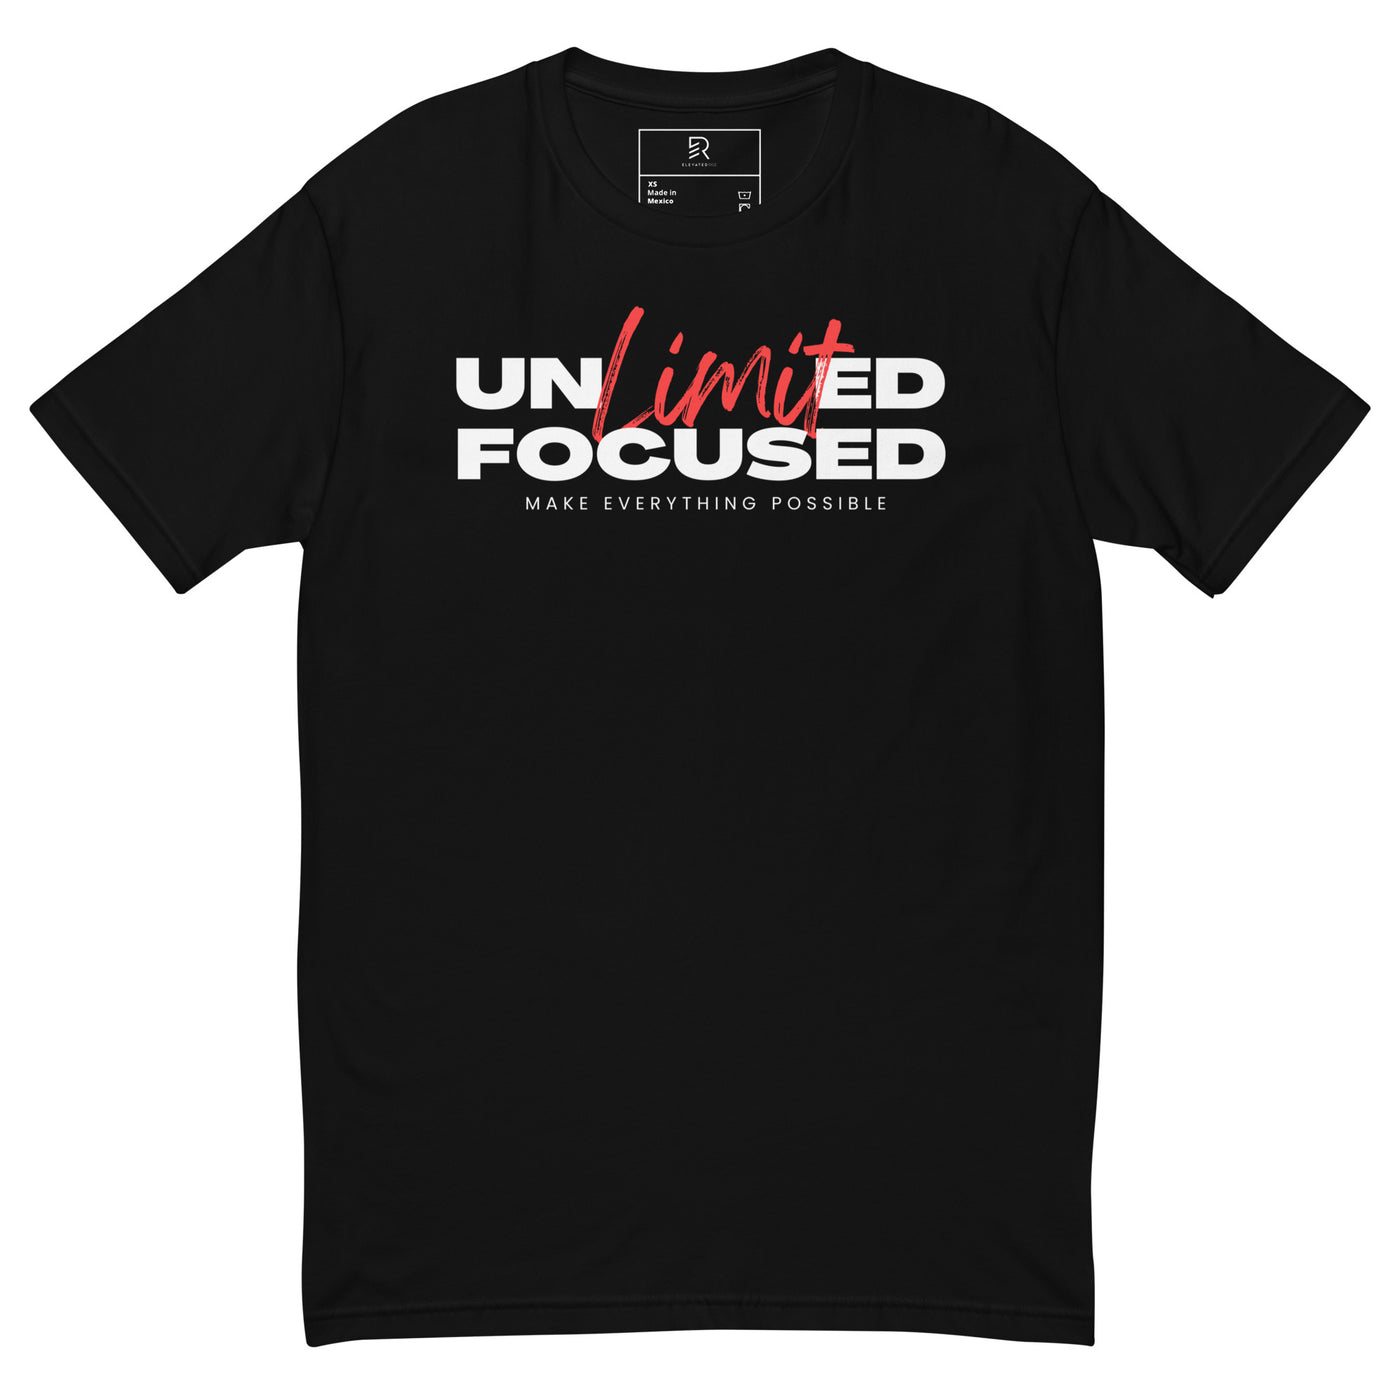 Men's Fitted Black T-shirt - Unlimited Focus